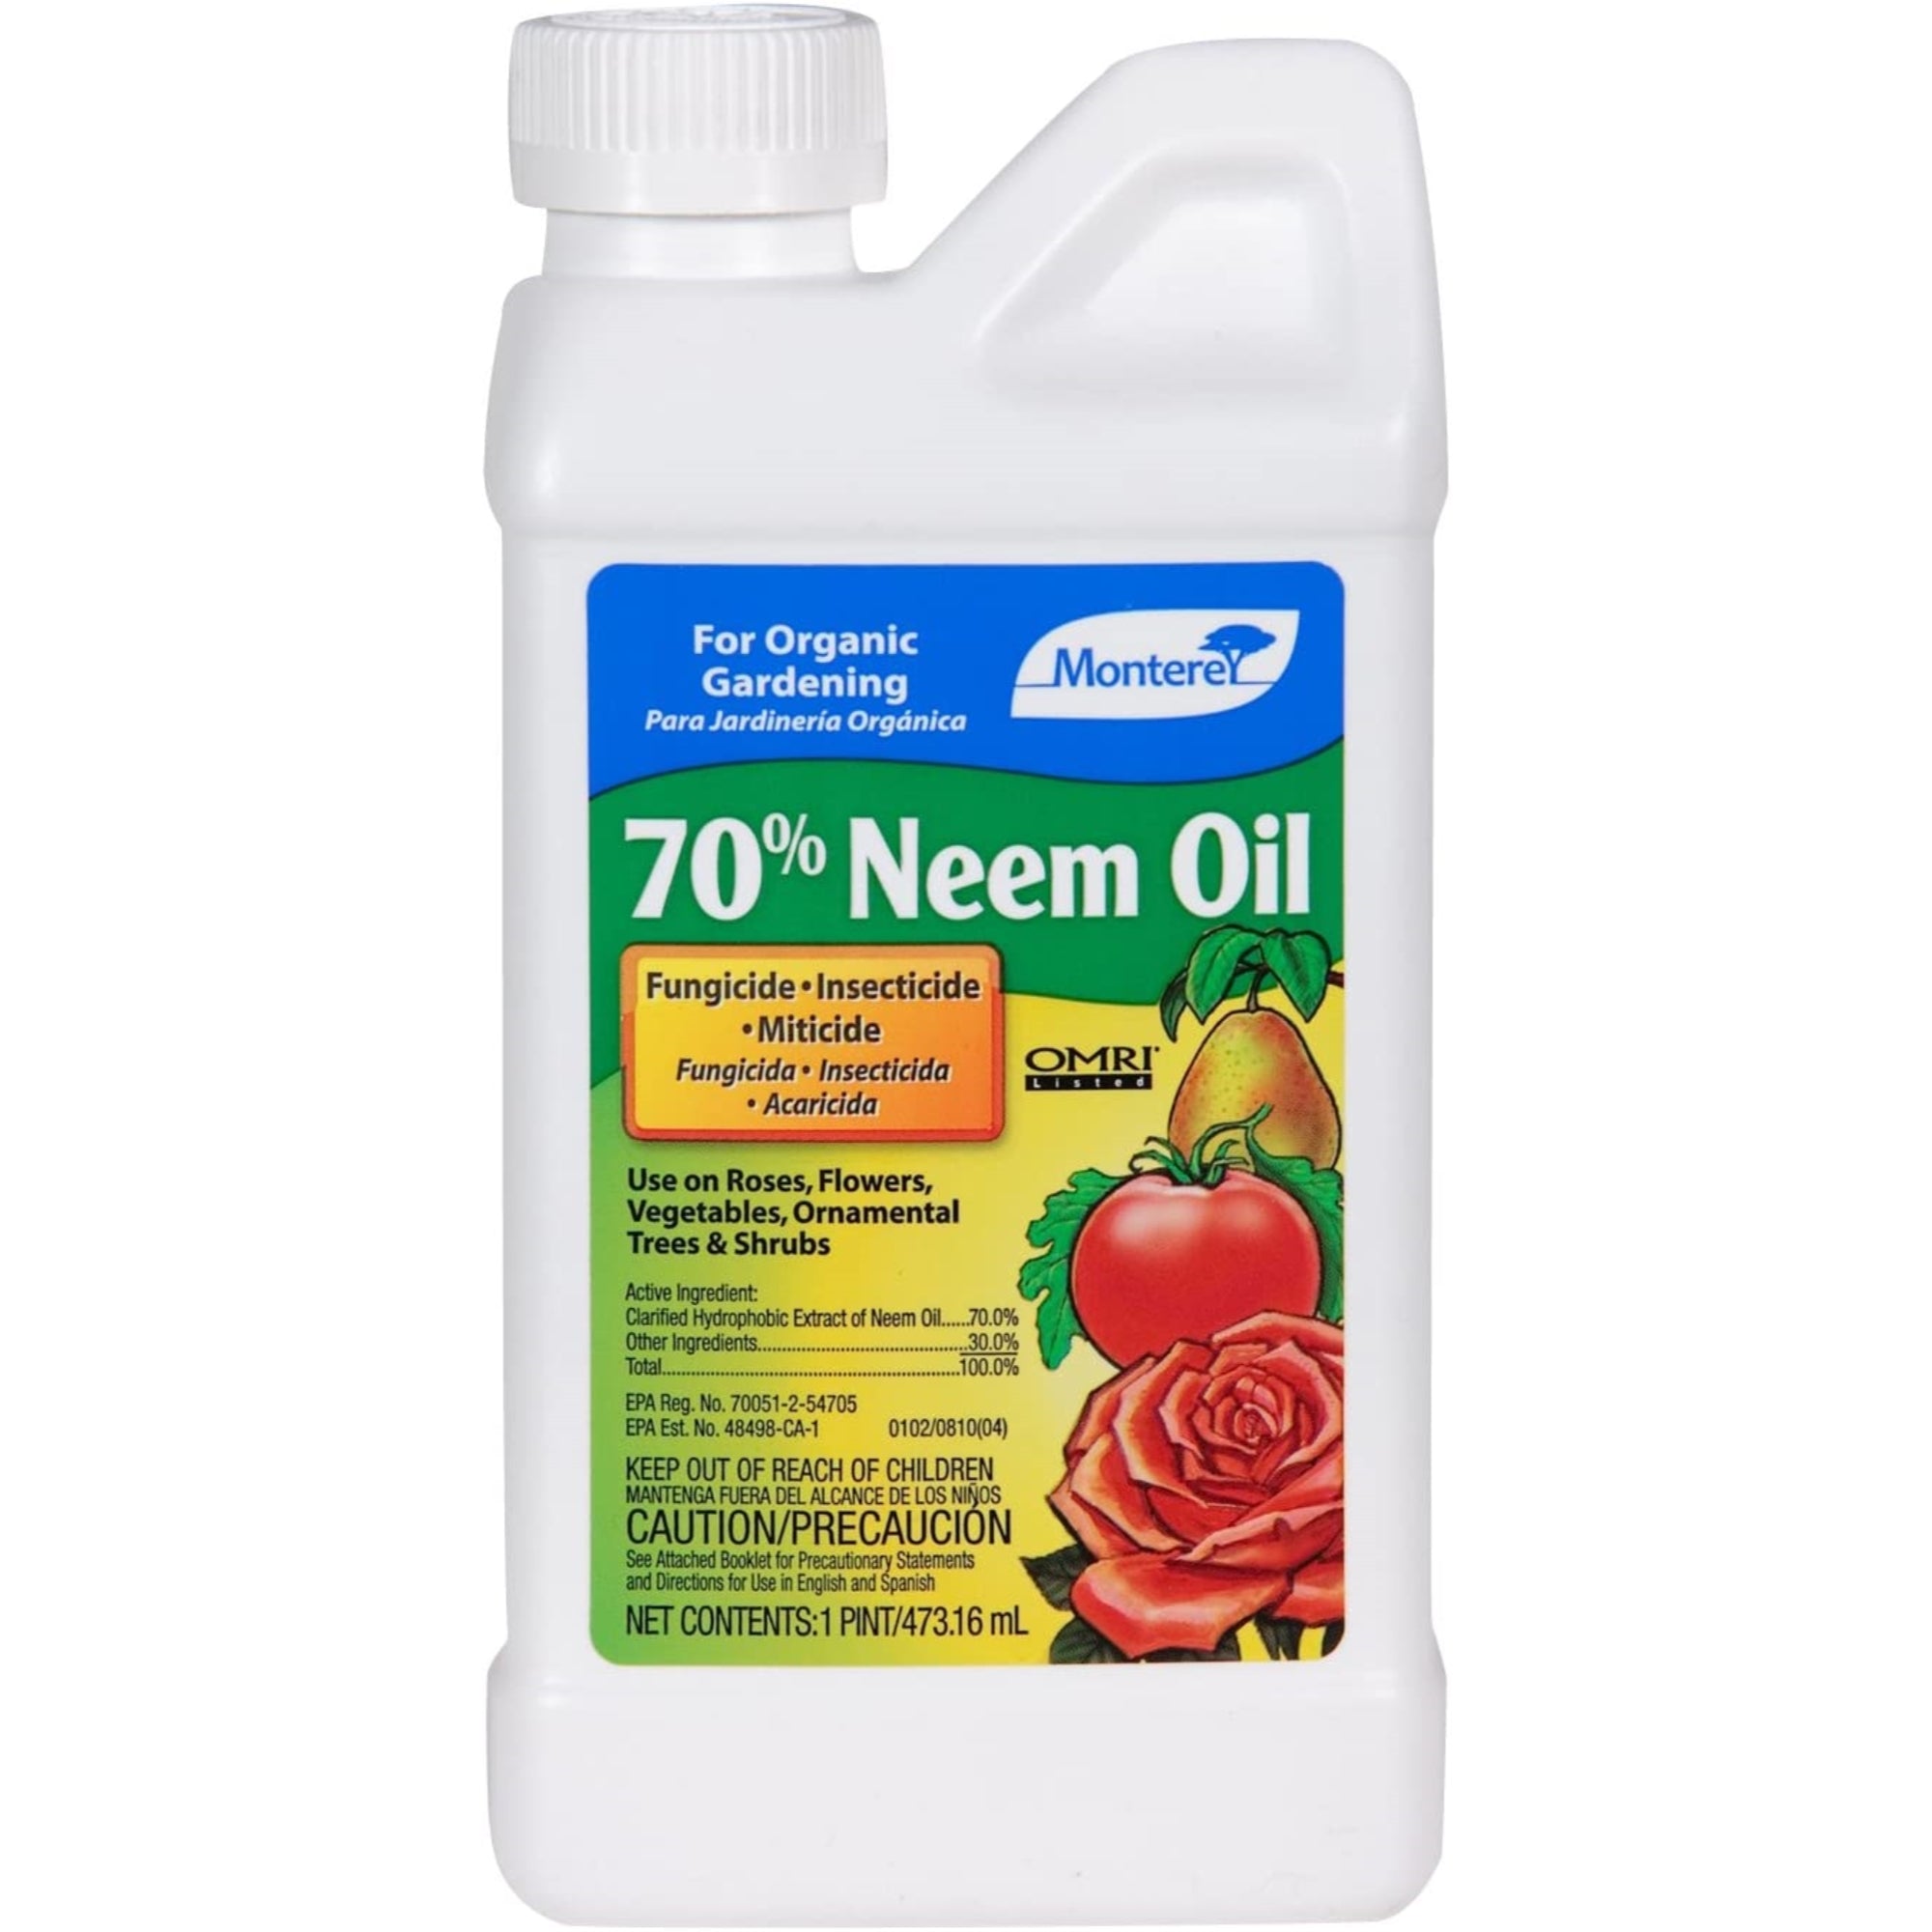 Monterey Neem Oil 70% for Controlling Insects & Disease - Pint LG6140